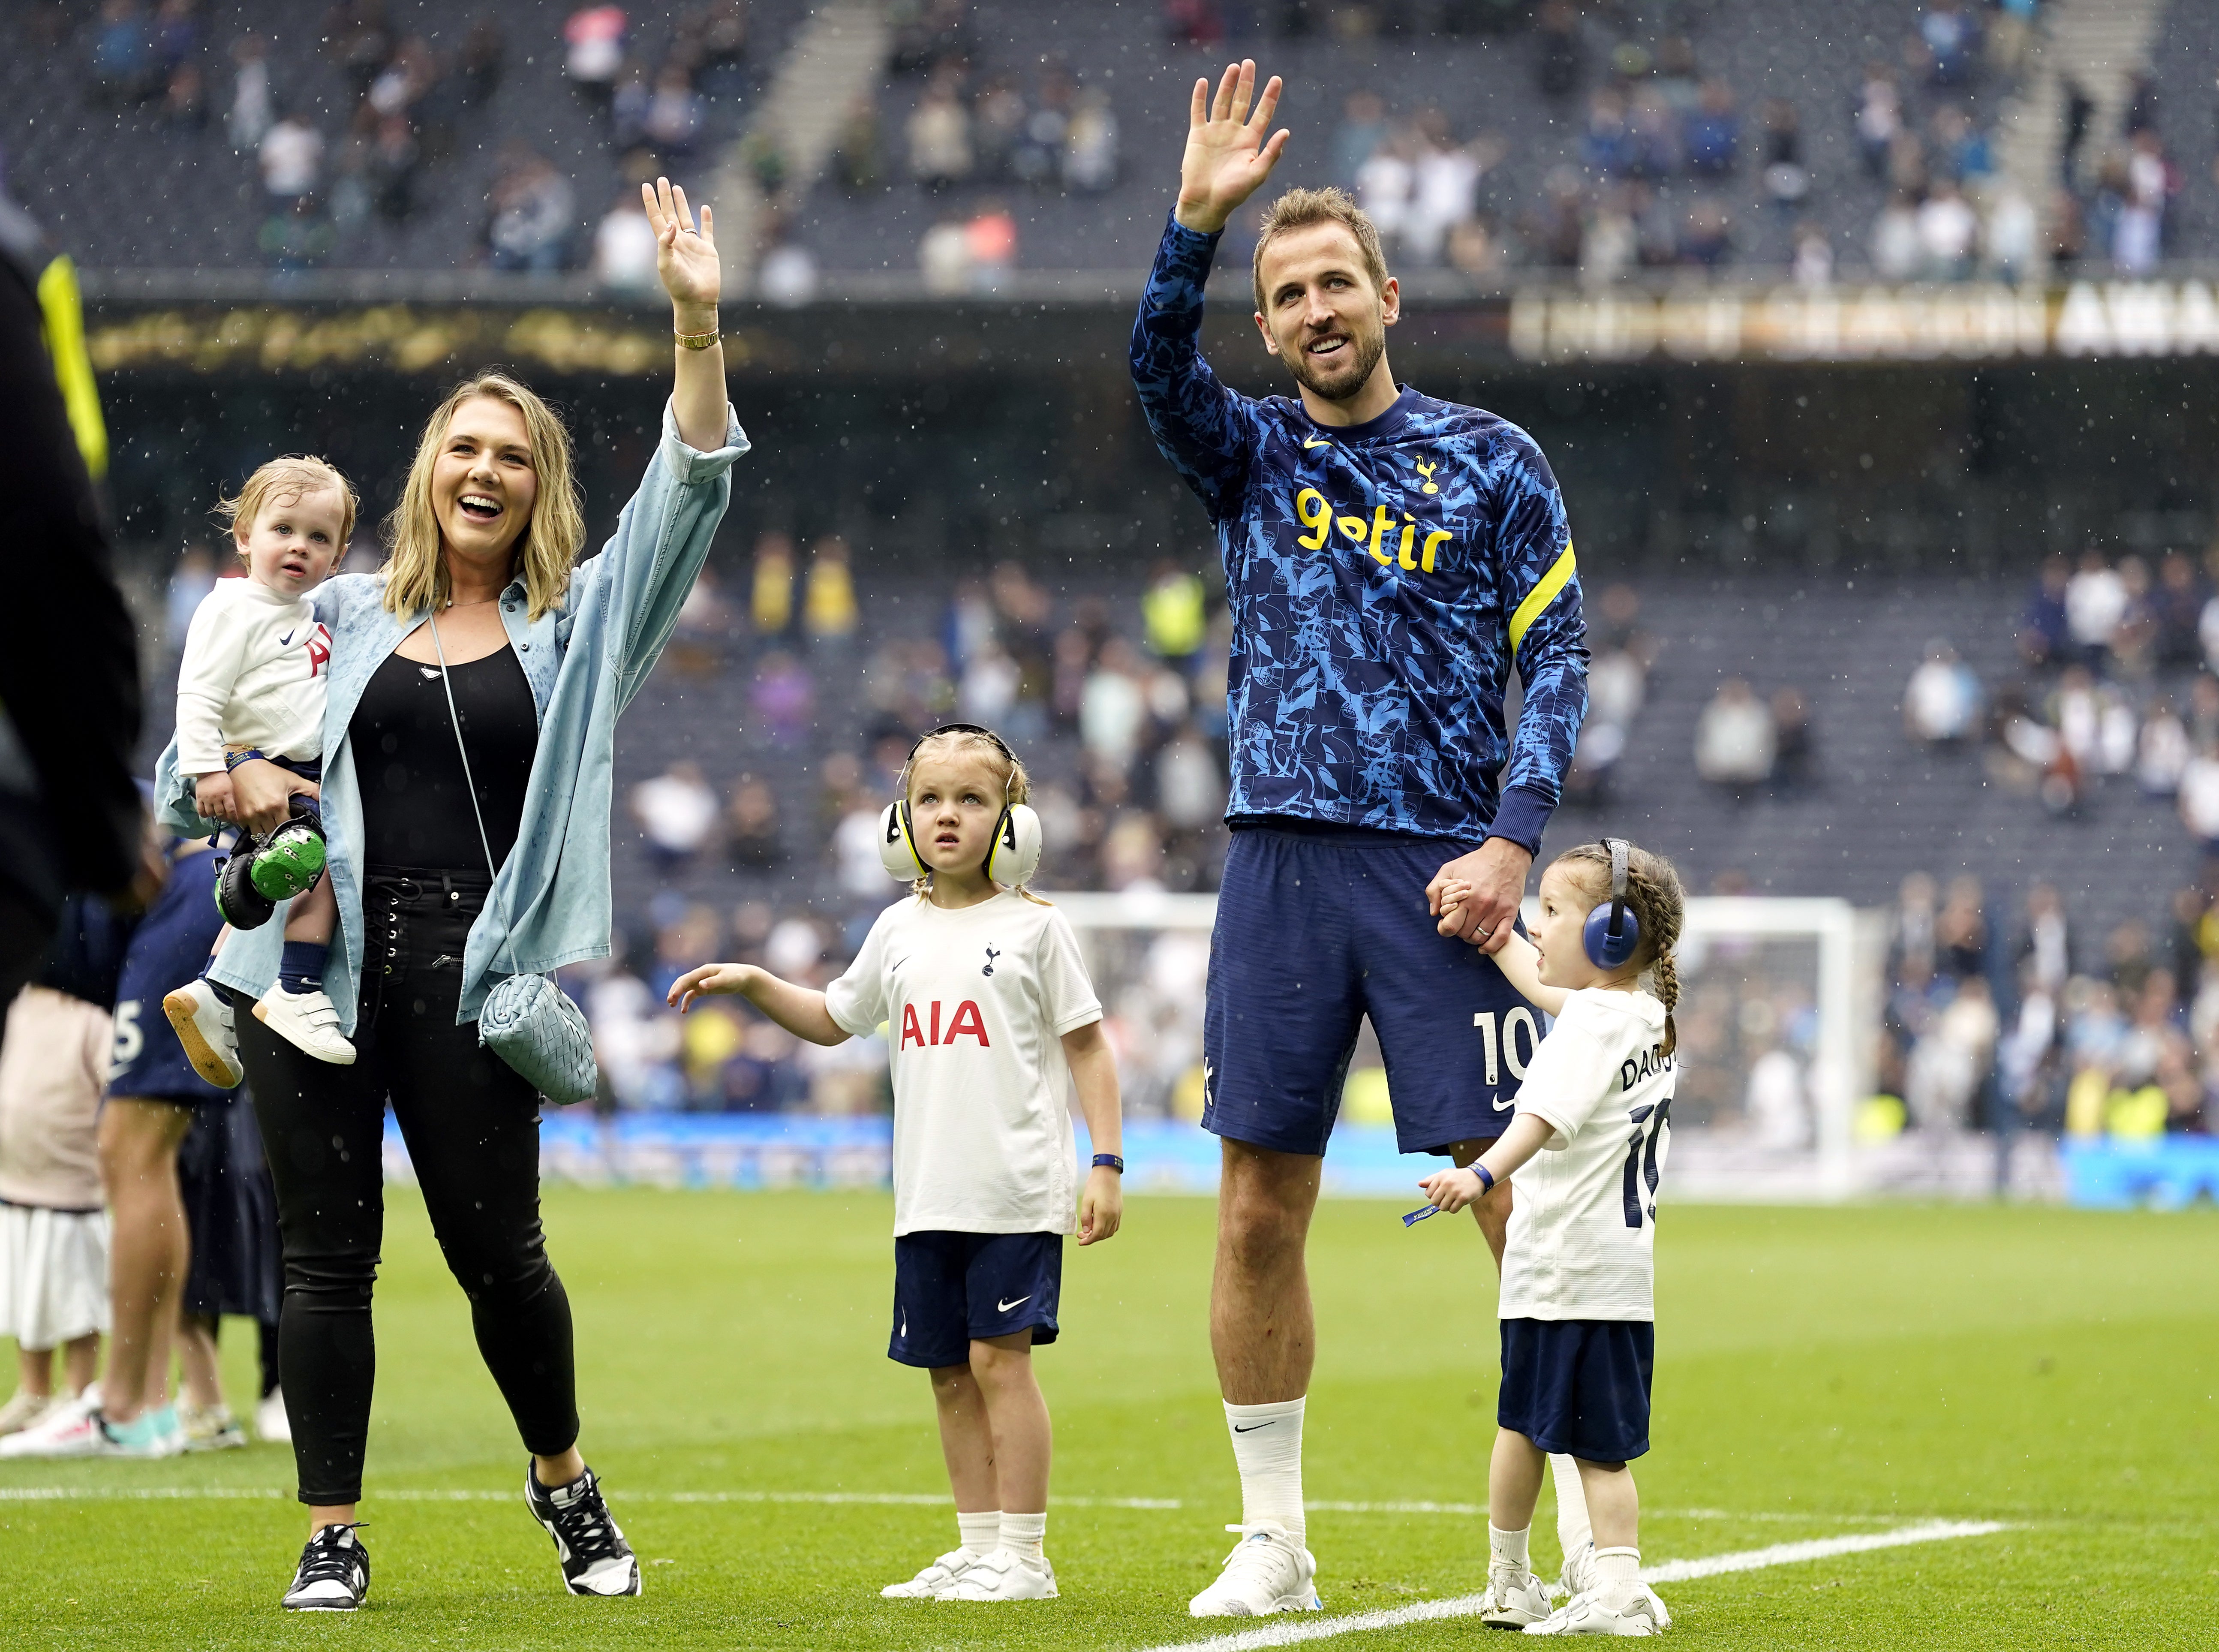 Harry Kane with wife Katie Goodland and their children Ivy, Vivienne Jane and Louis on the pitch after the Premier League match at the Tottenham Hotspur Stadium in 2022